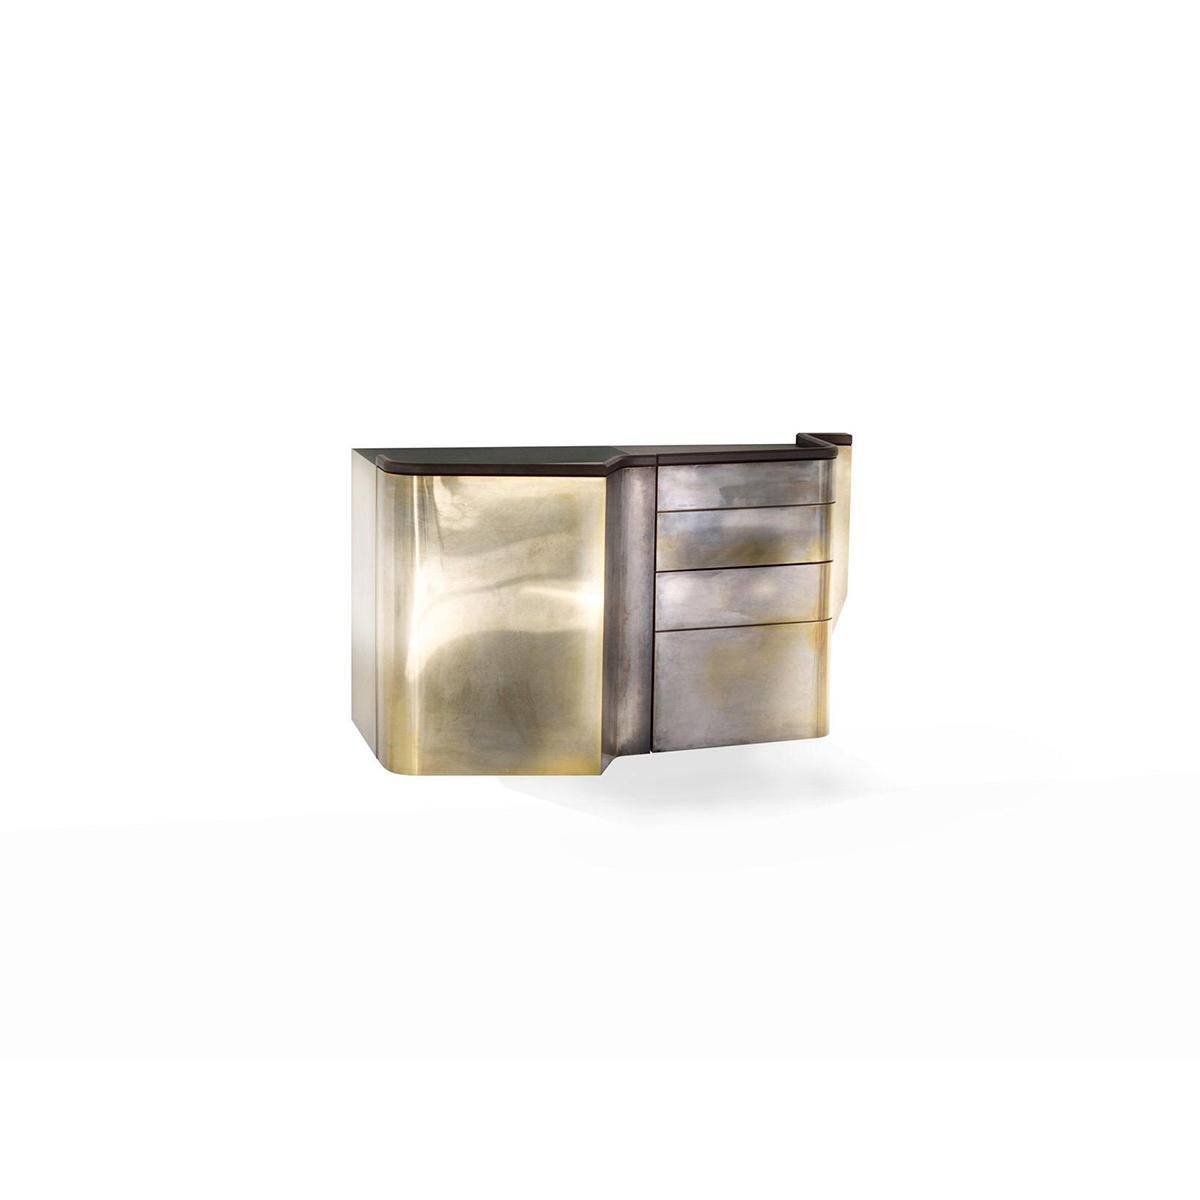 European Silvered Brass Faced Console Sideboard with Marble, Leather and Wood Finishes